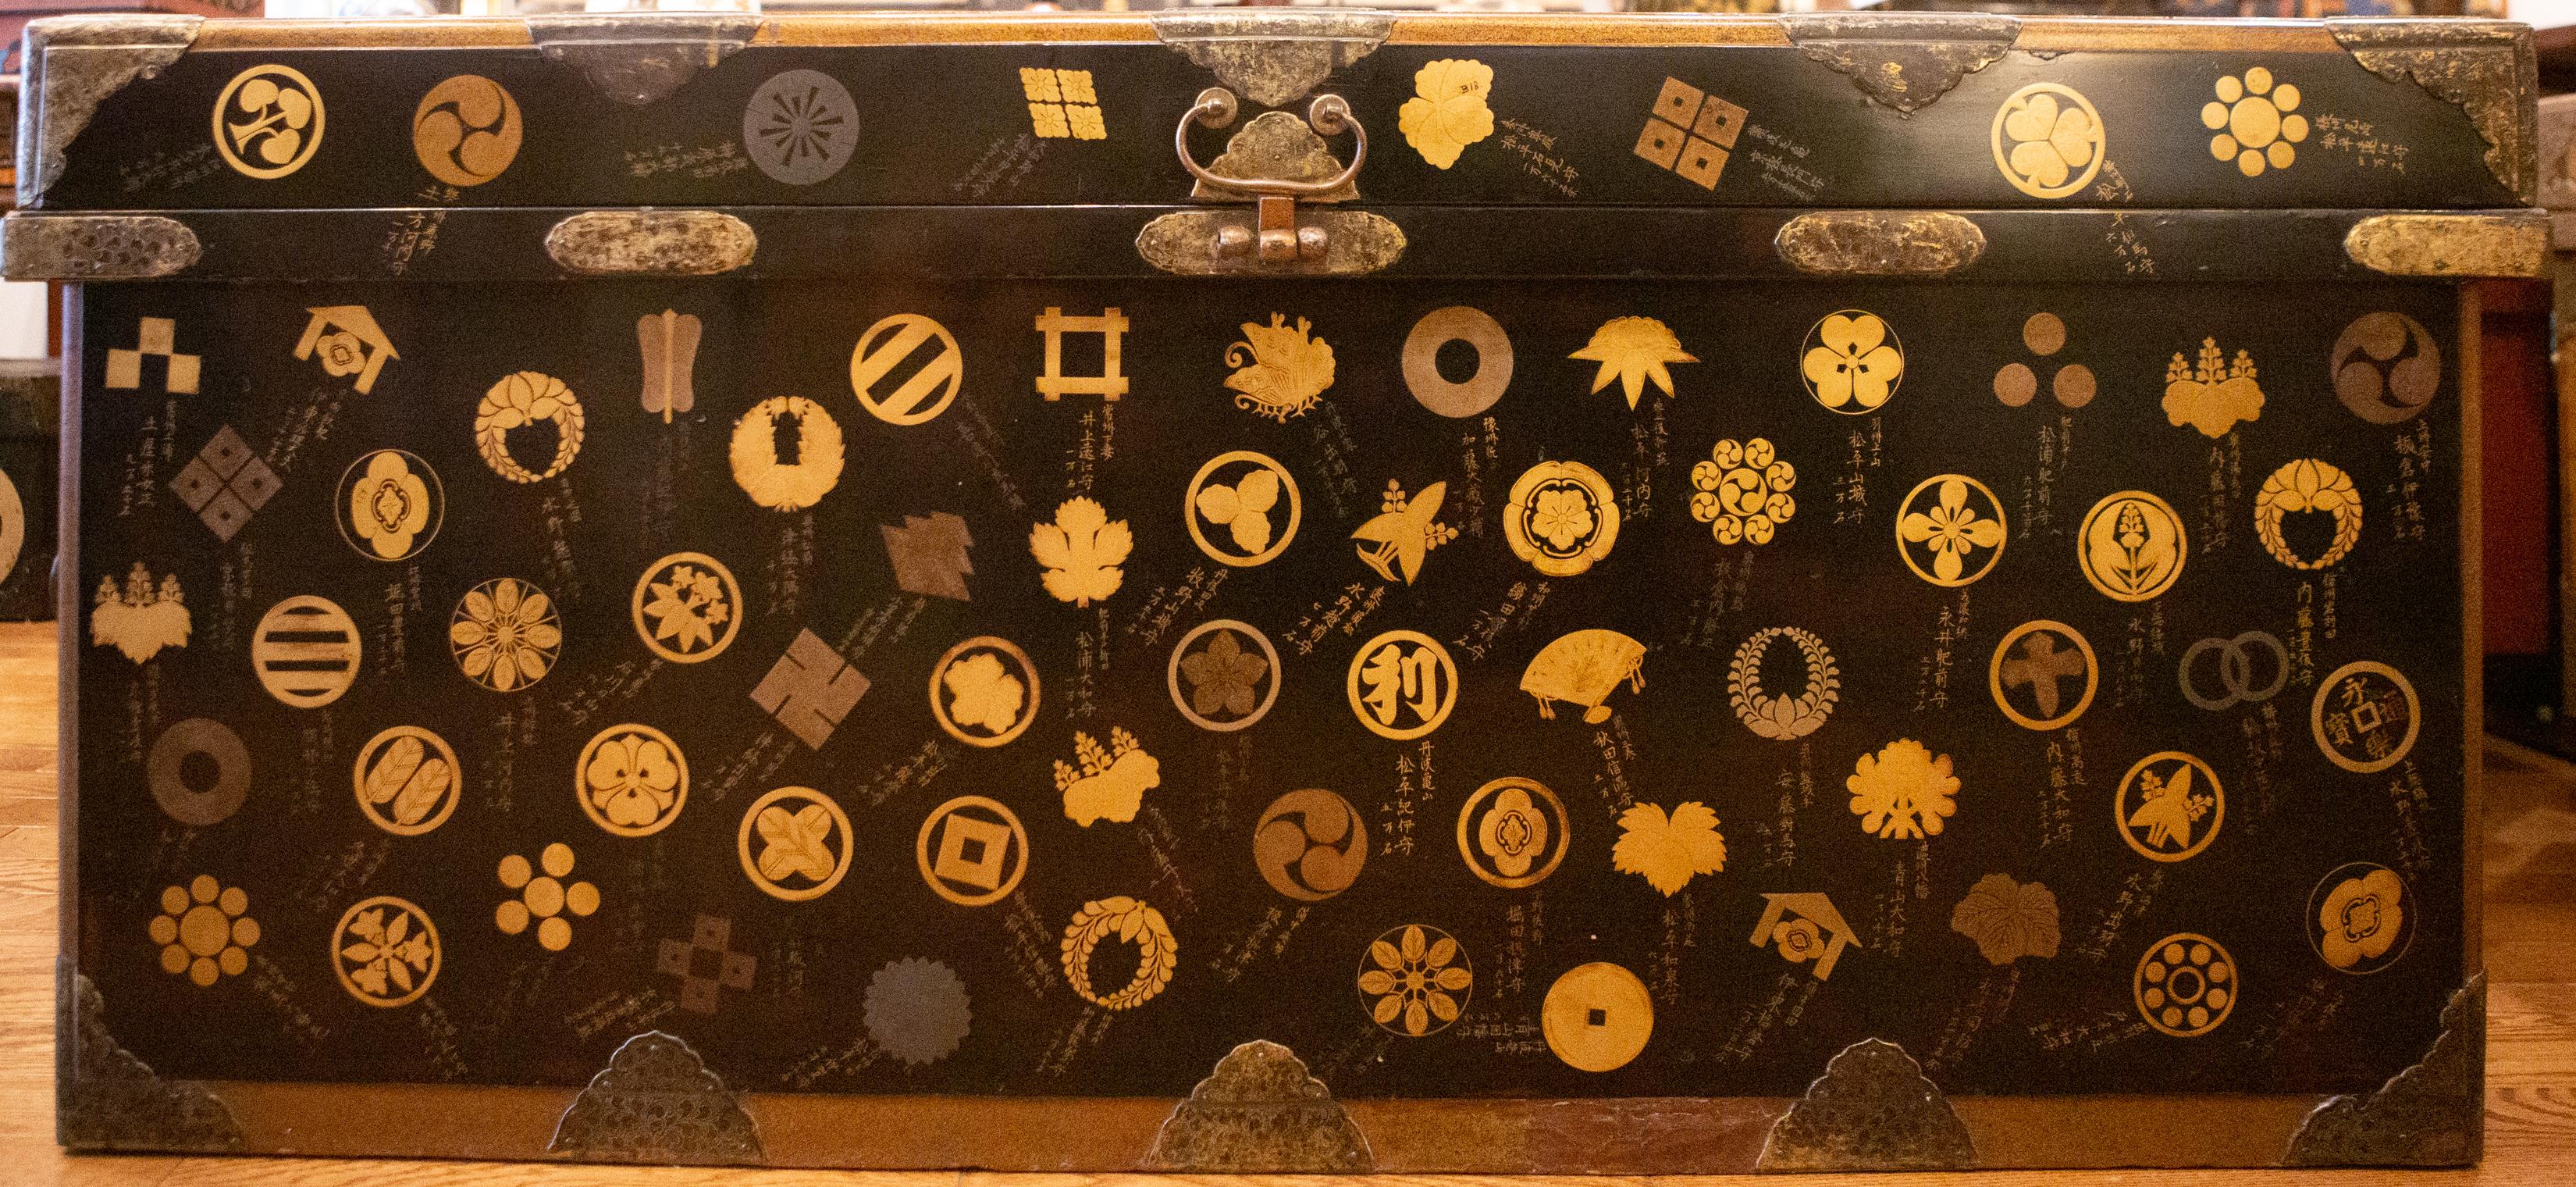 Historically important and rare Japanese lacquer trunk with 275 family crests. This trunk, originally used for storing textiles, was commissioned by the Tokugawa Shogunate in the late Edo period to commemorate his allegiance with about 275 families